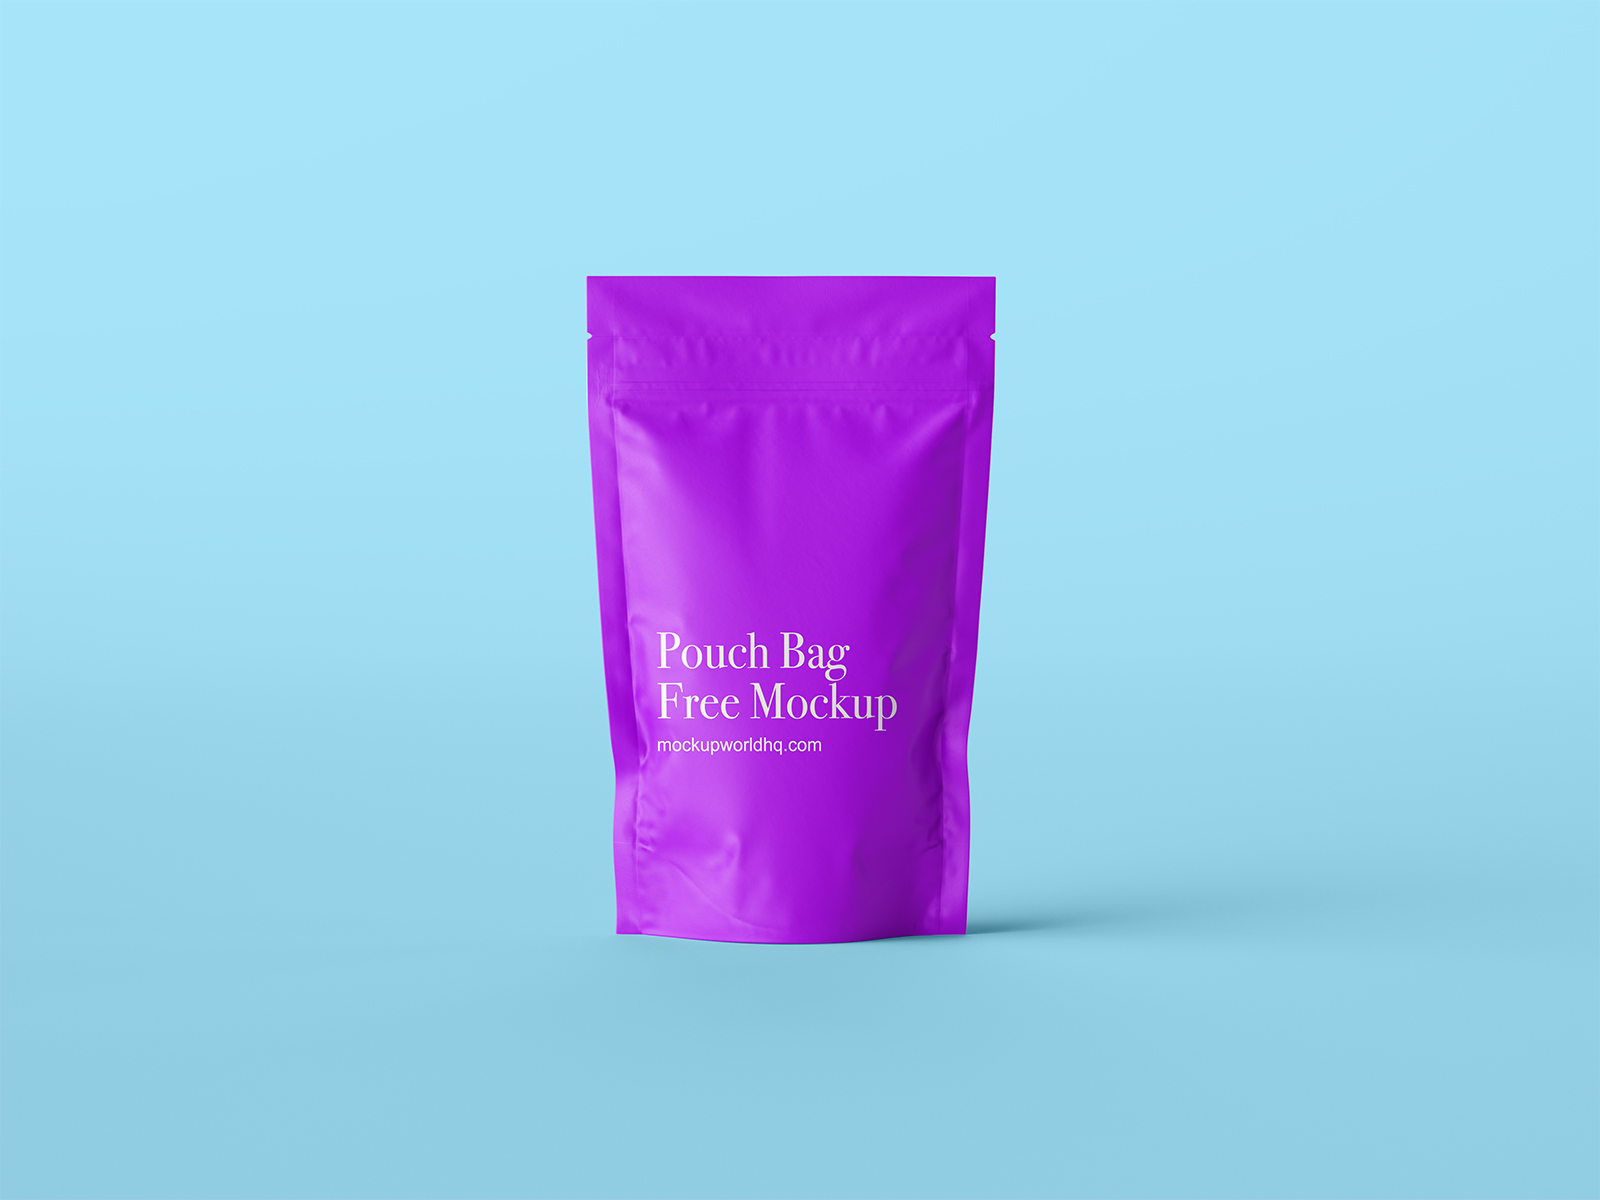 Pouch Bag Packaging Free Mockup